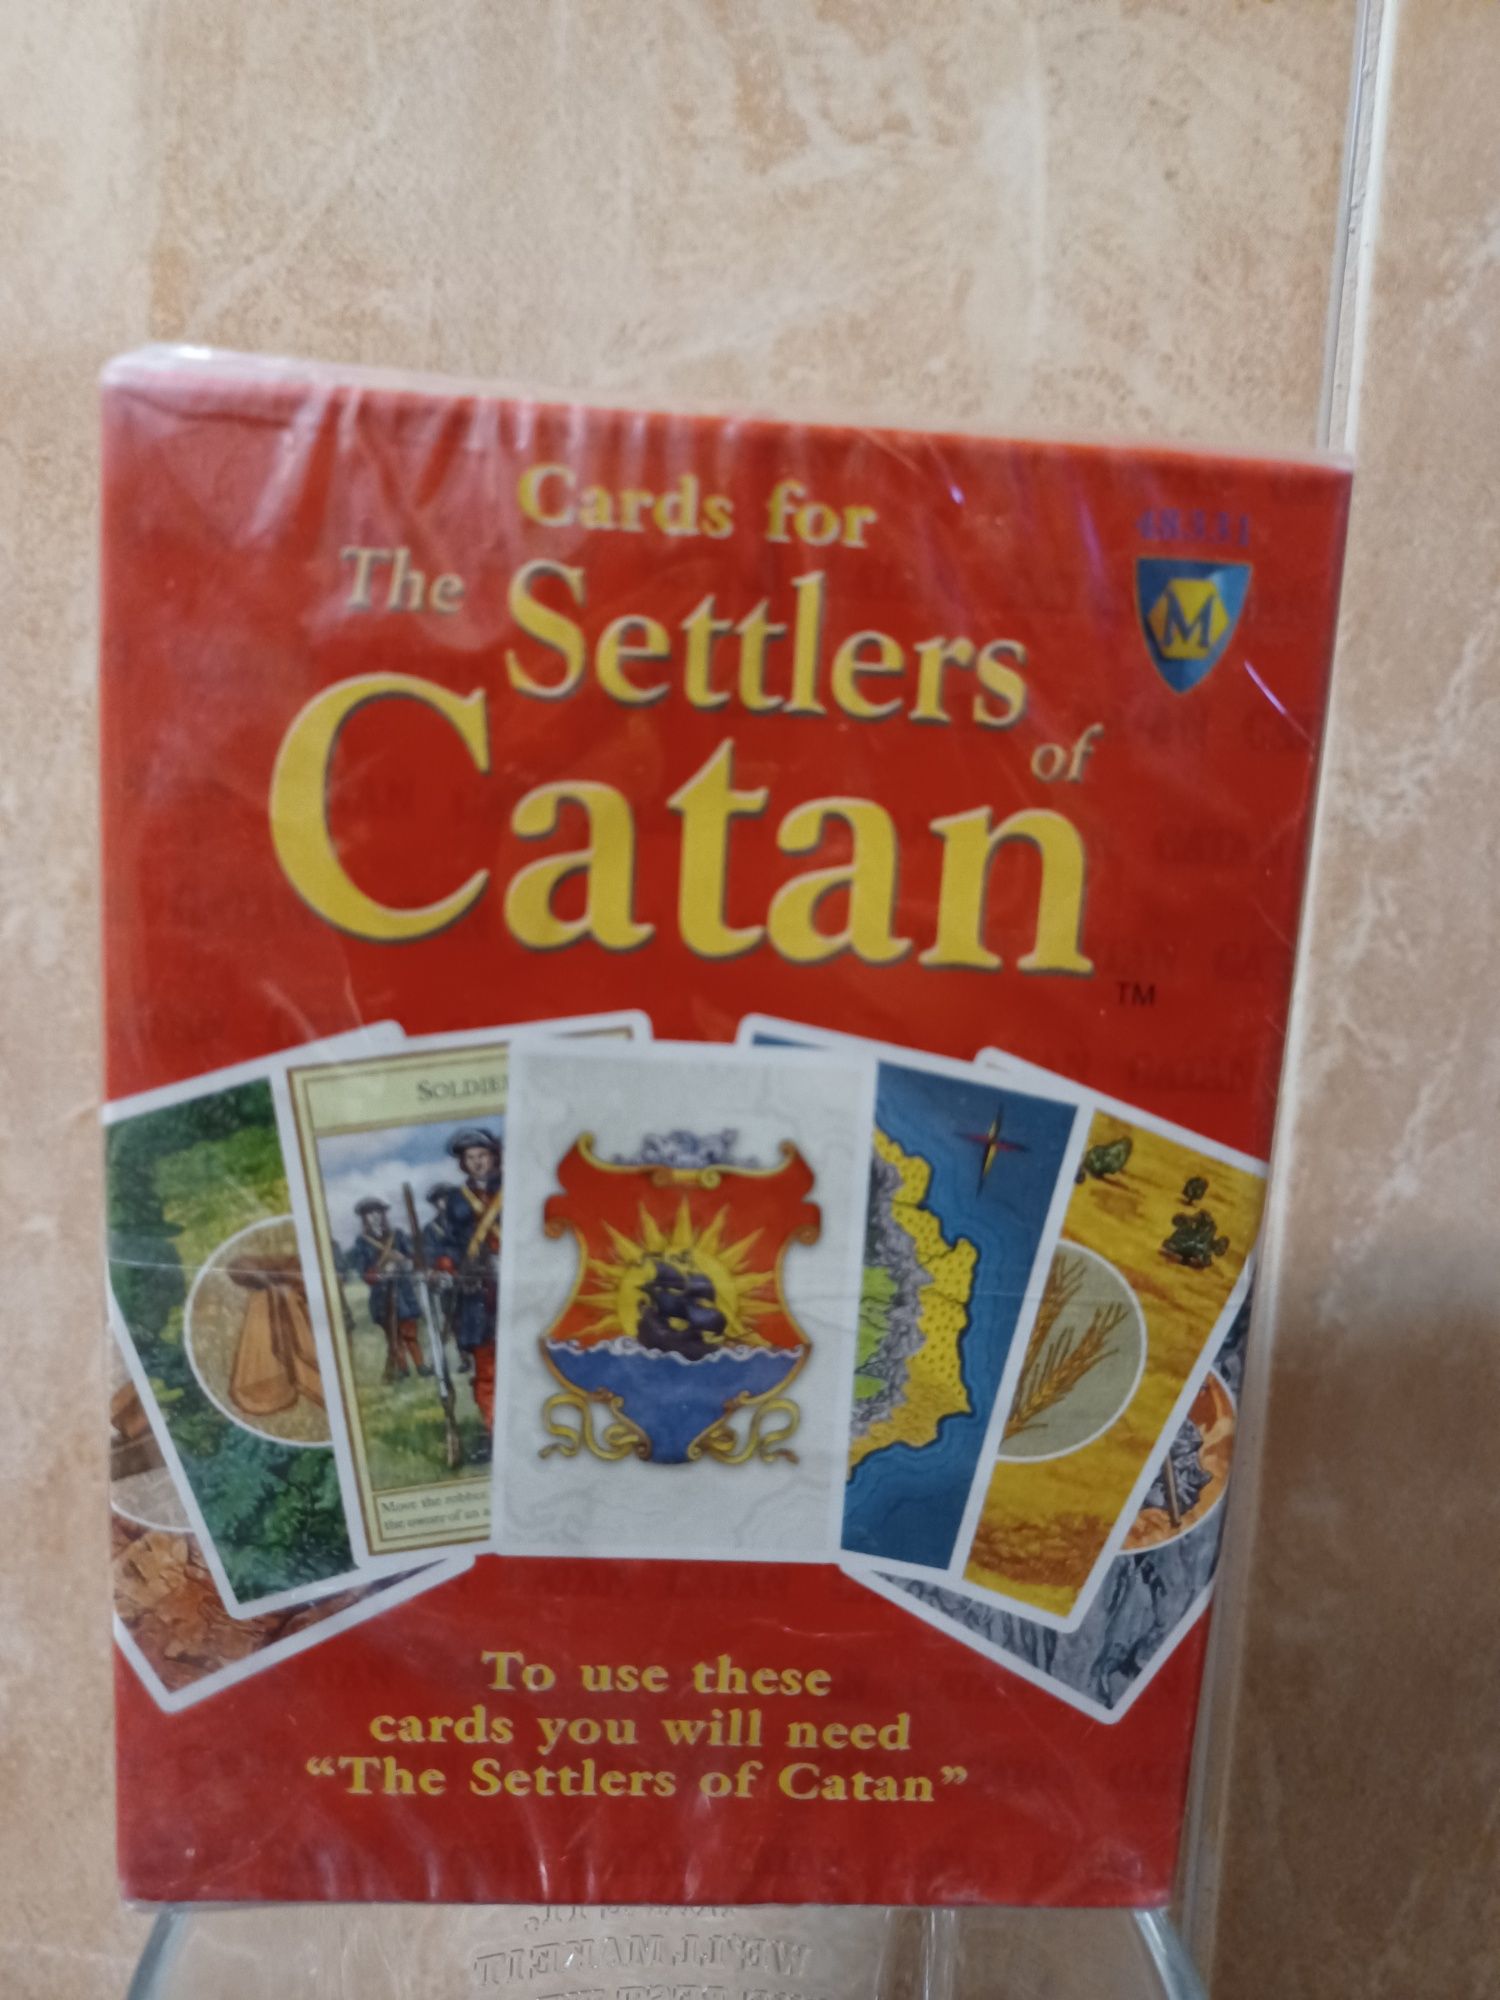 Cards for the Settlers of Catan